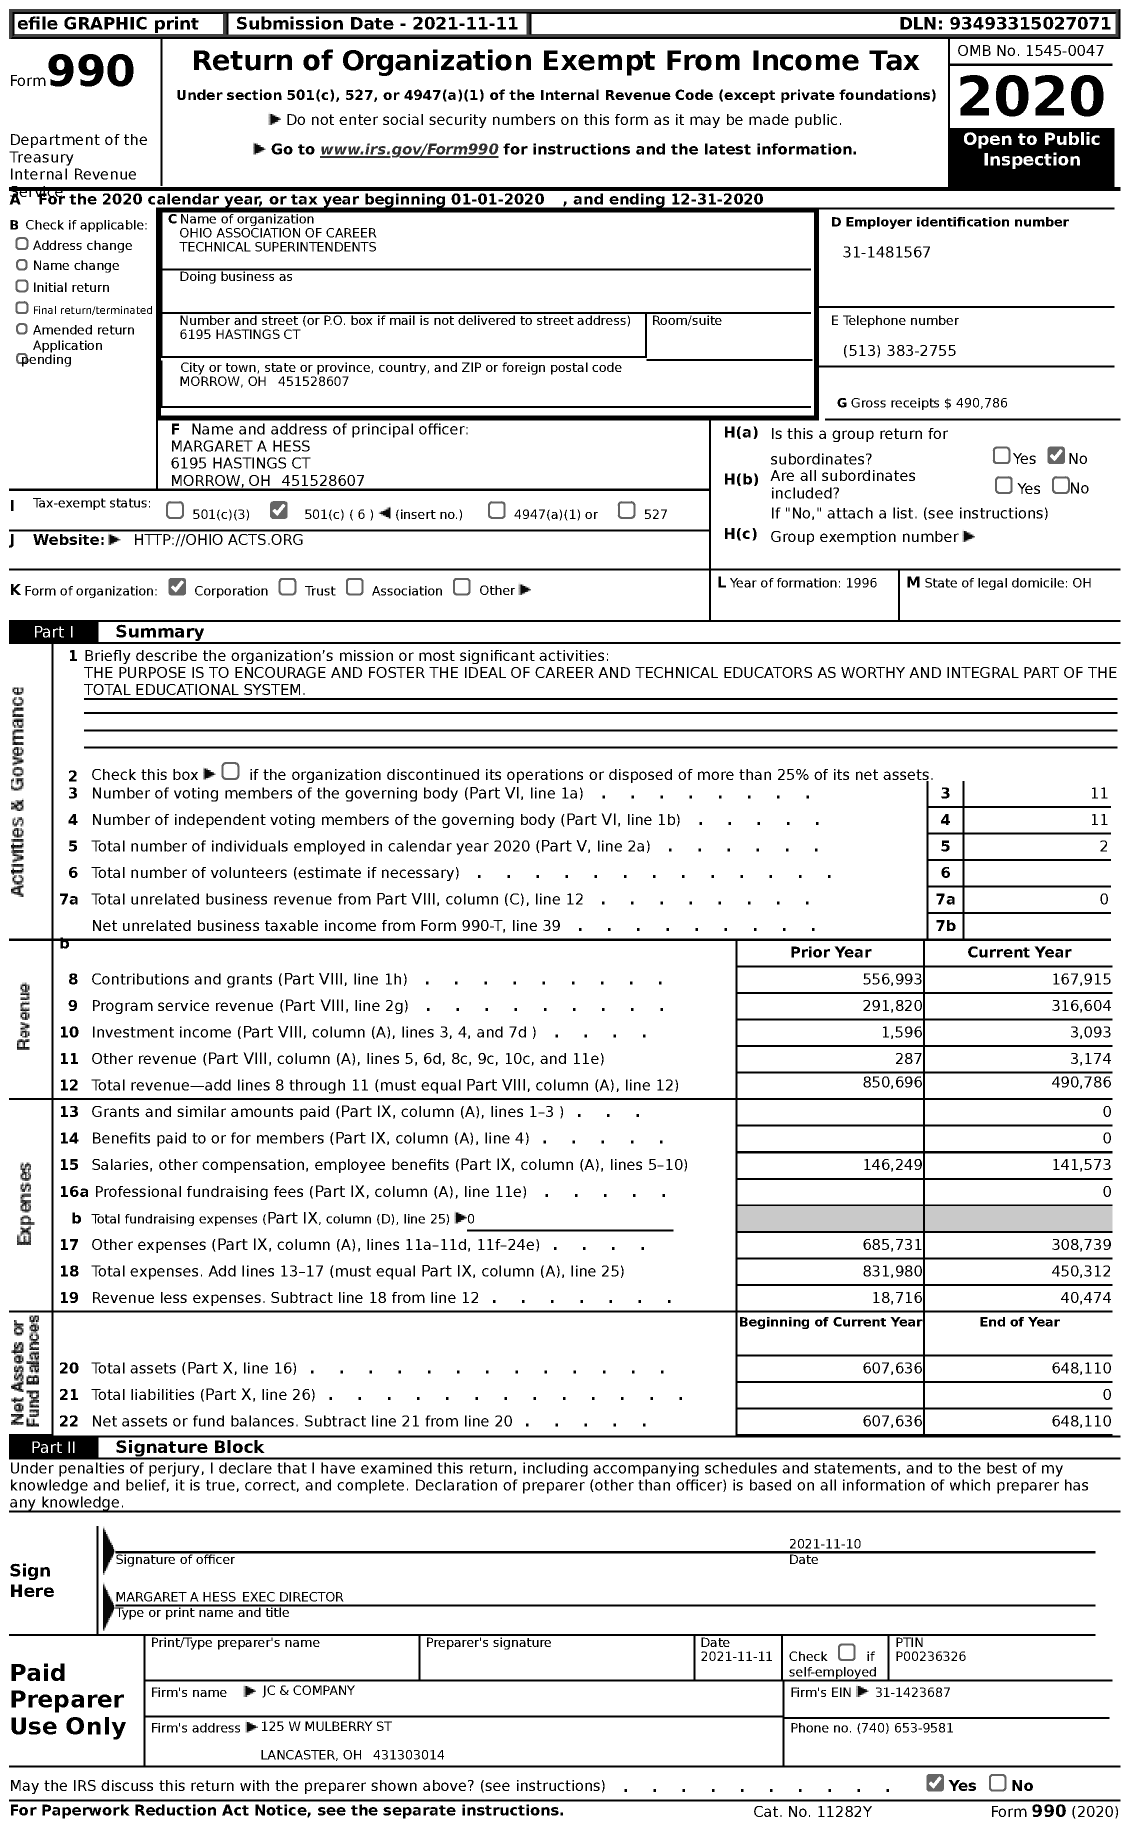 Image of first page of 2020 Form 990 for Ohio Association of Career Technical Superintendents